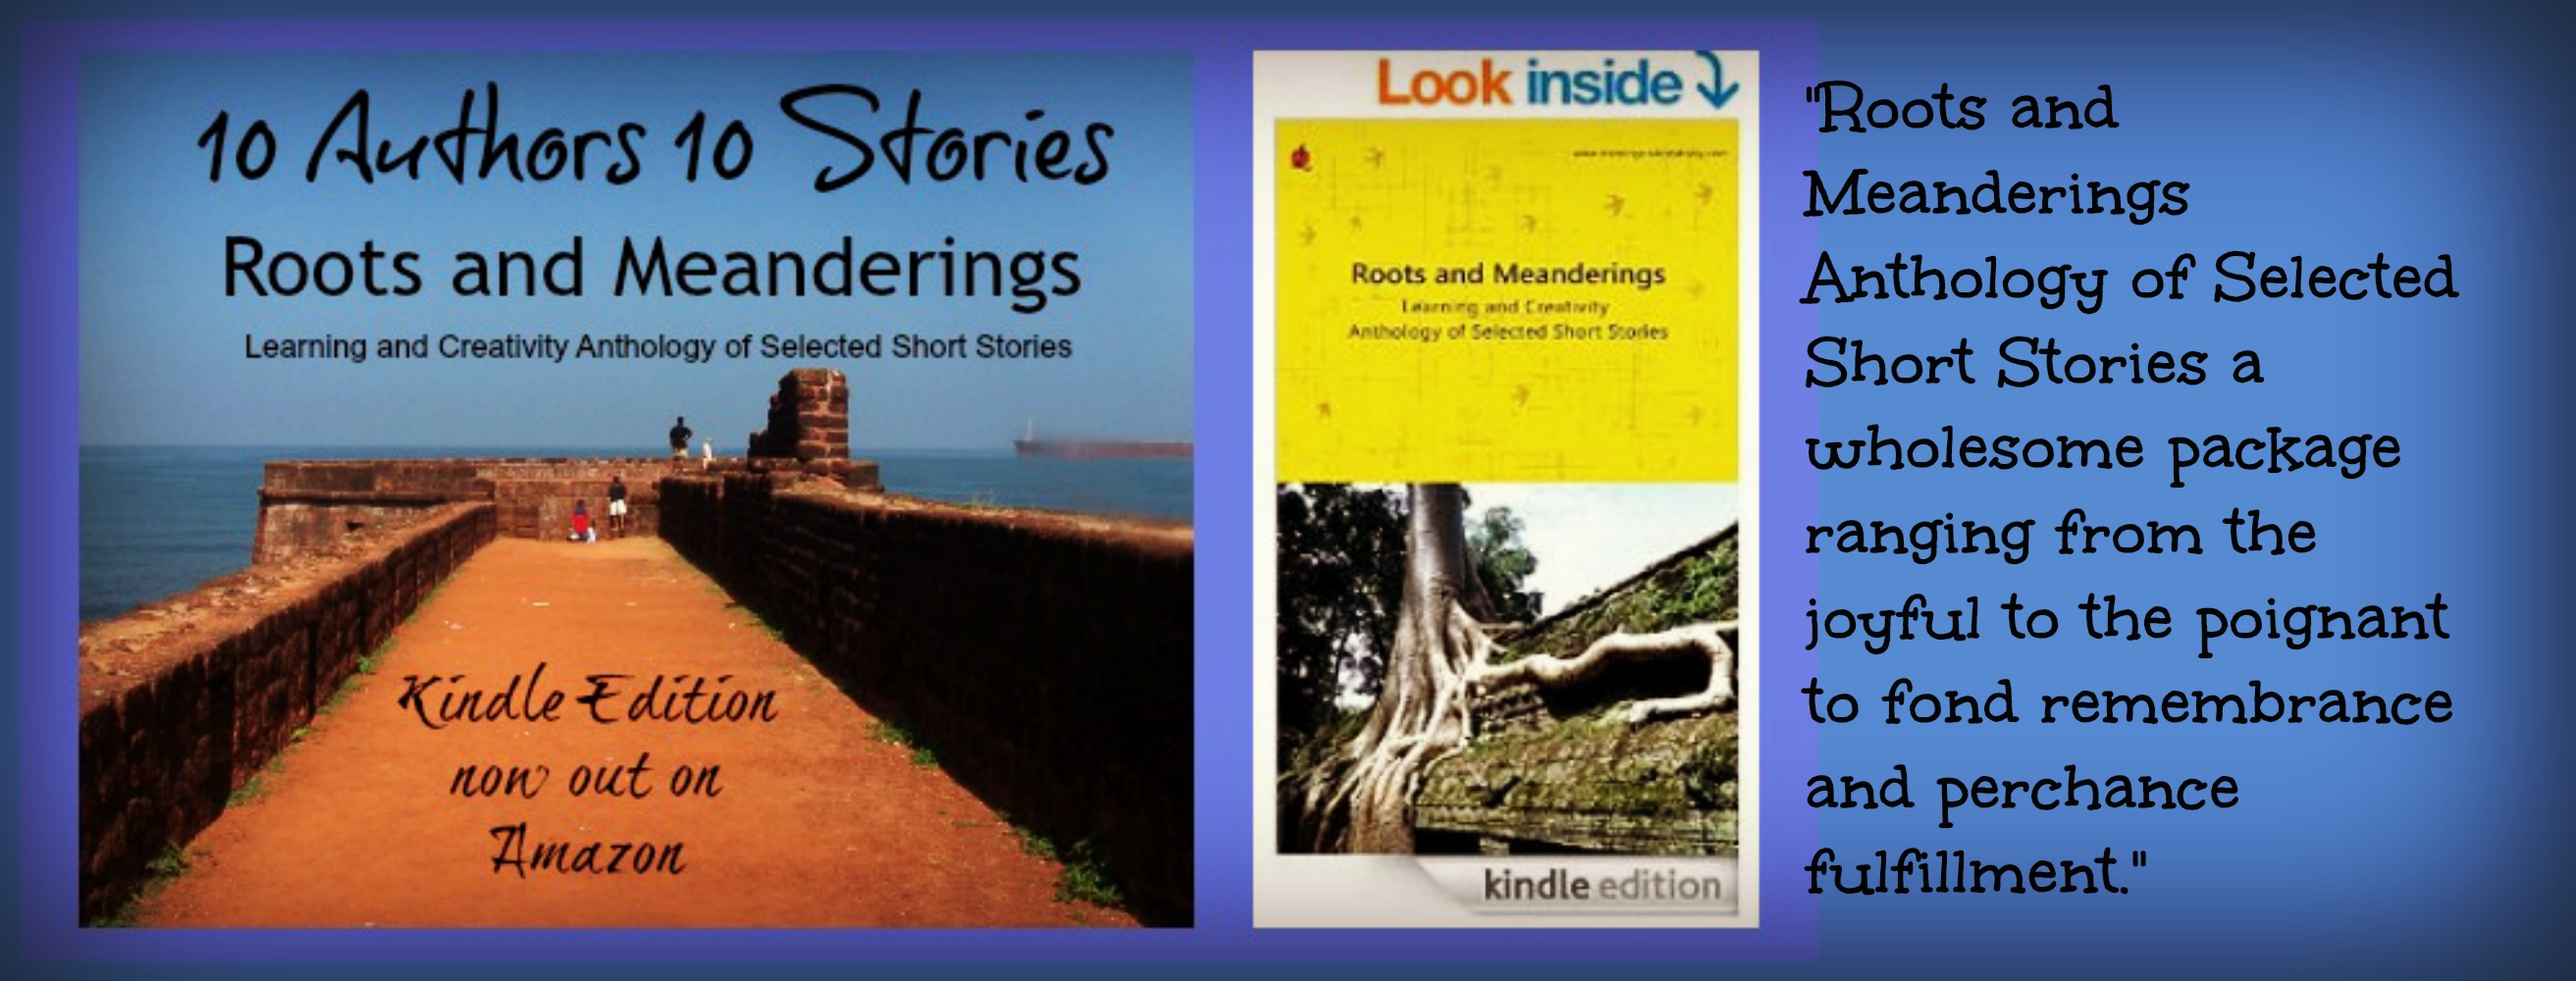 Roots and Meanderings Learning and Creativity Anthology of Selected Short Stories review